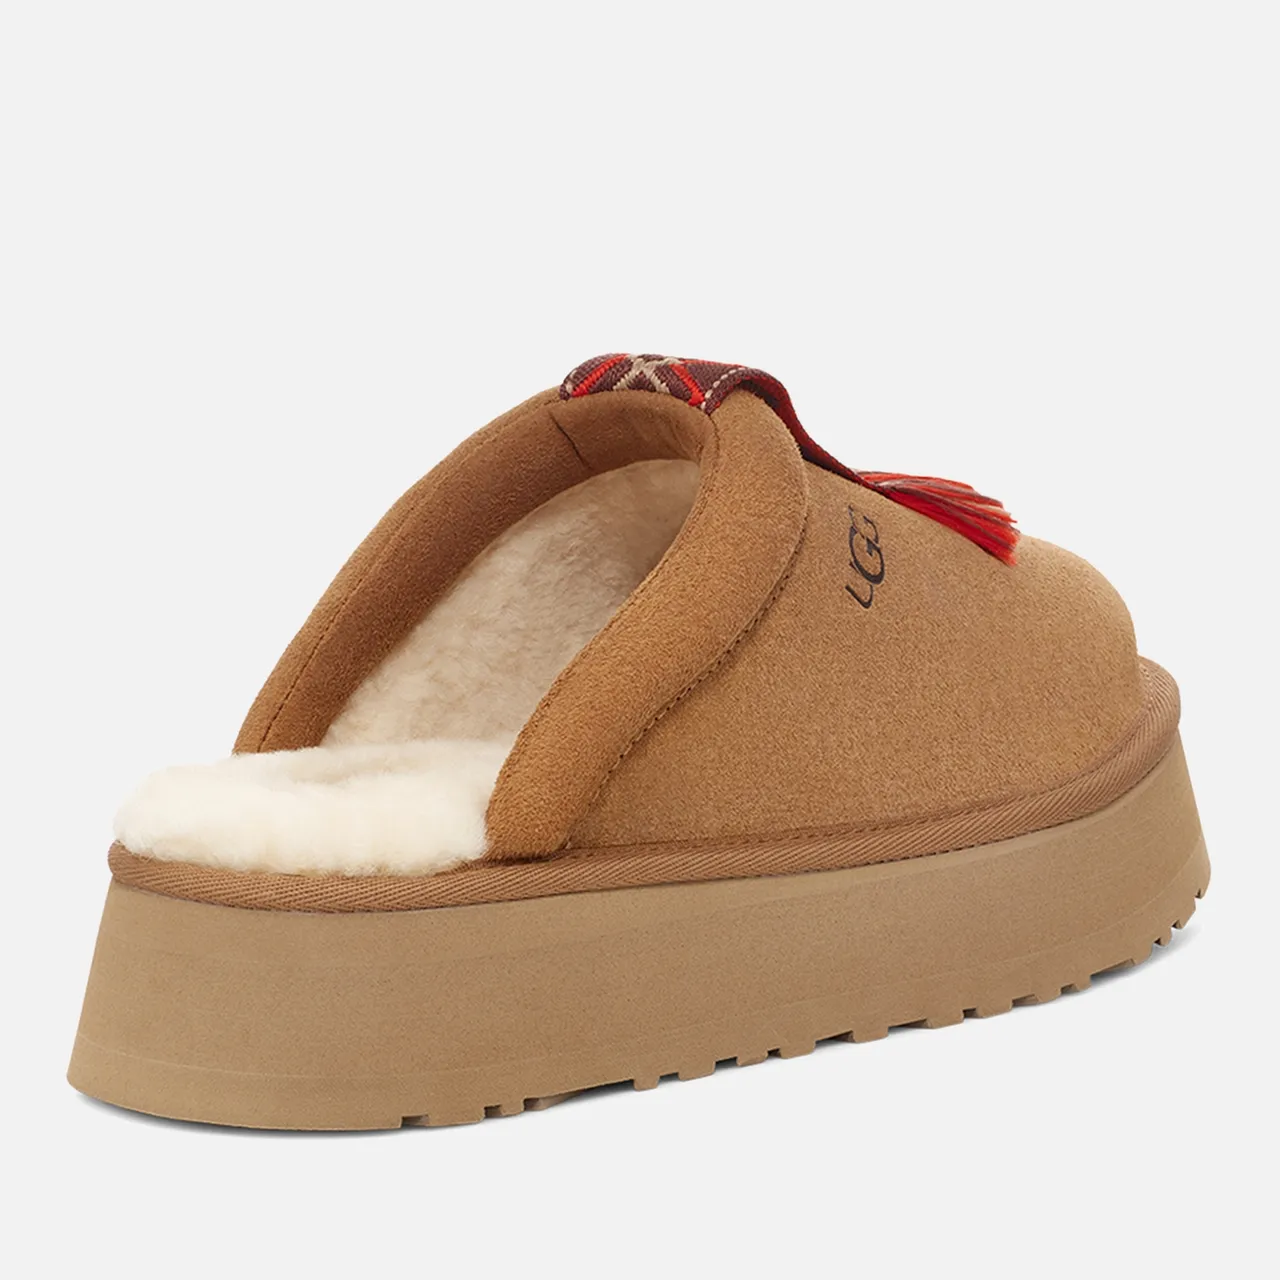 UGG Women's Tazzle Suede Slippers